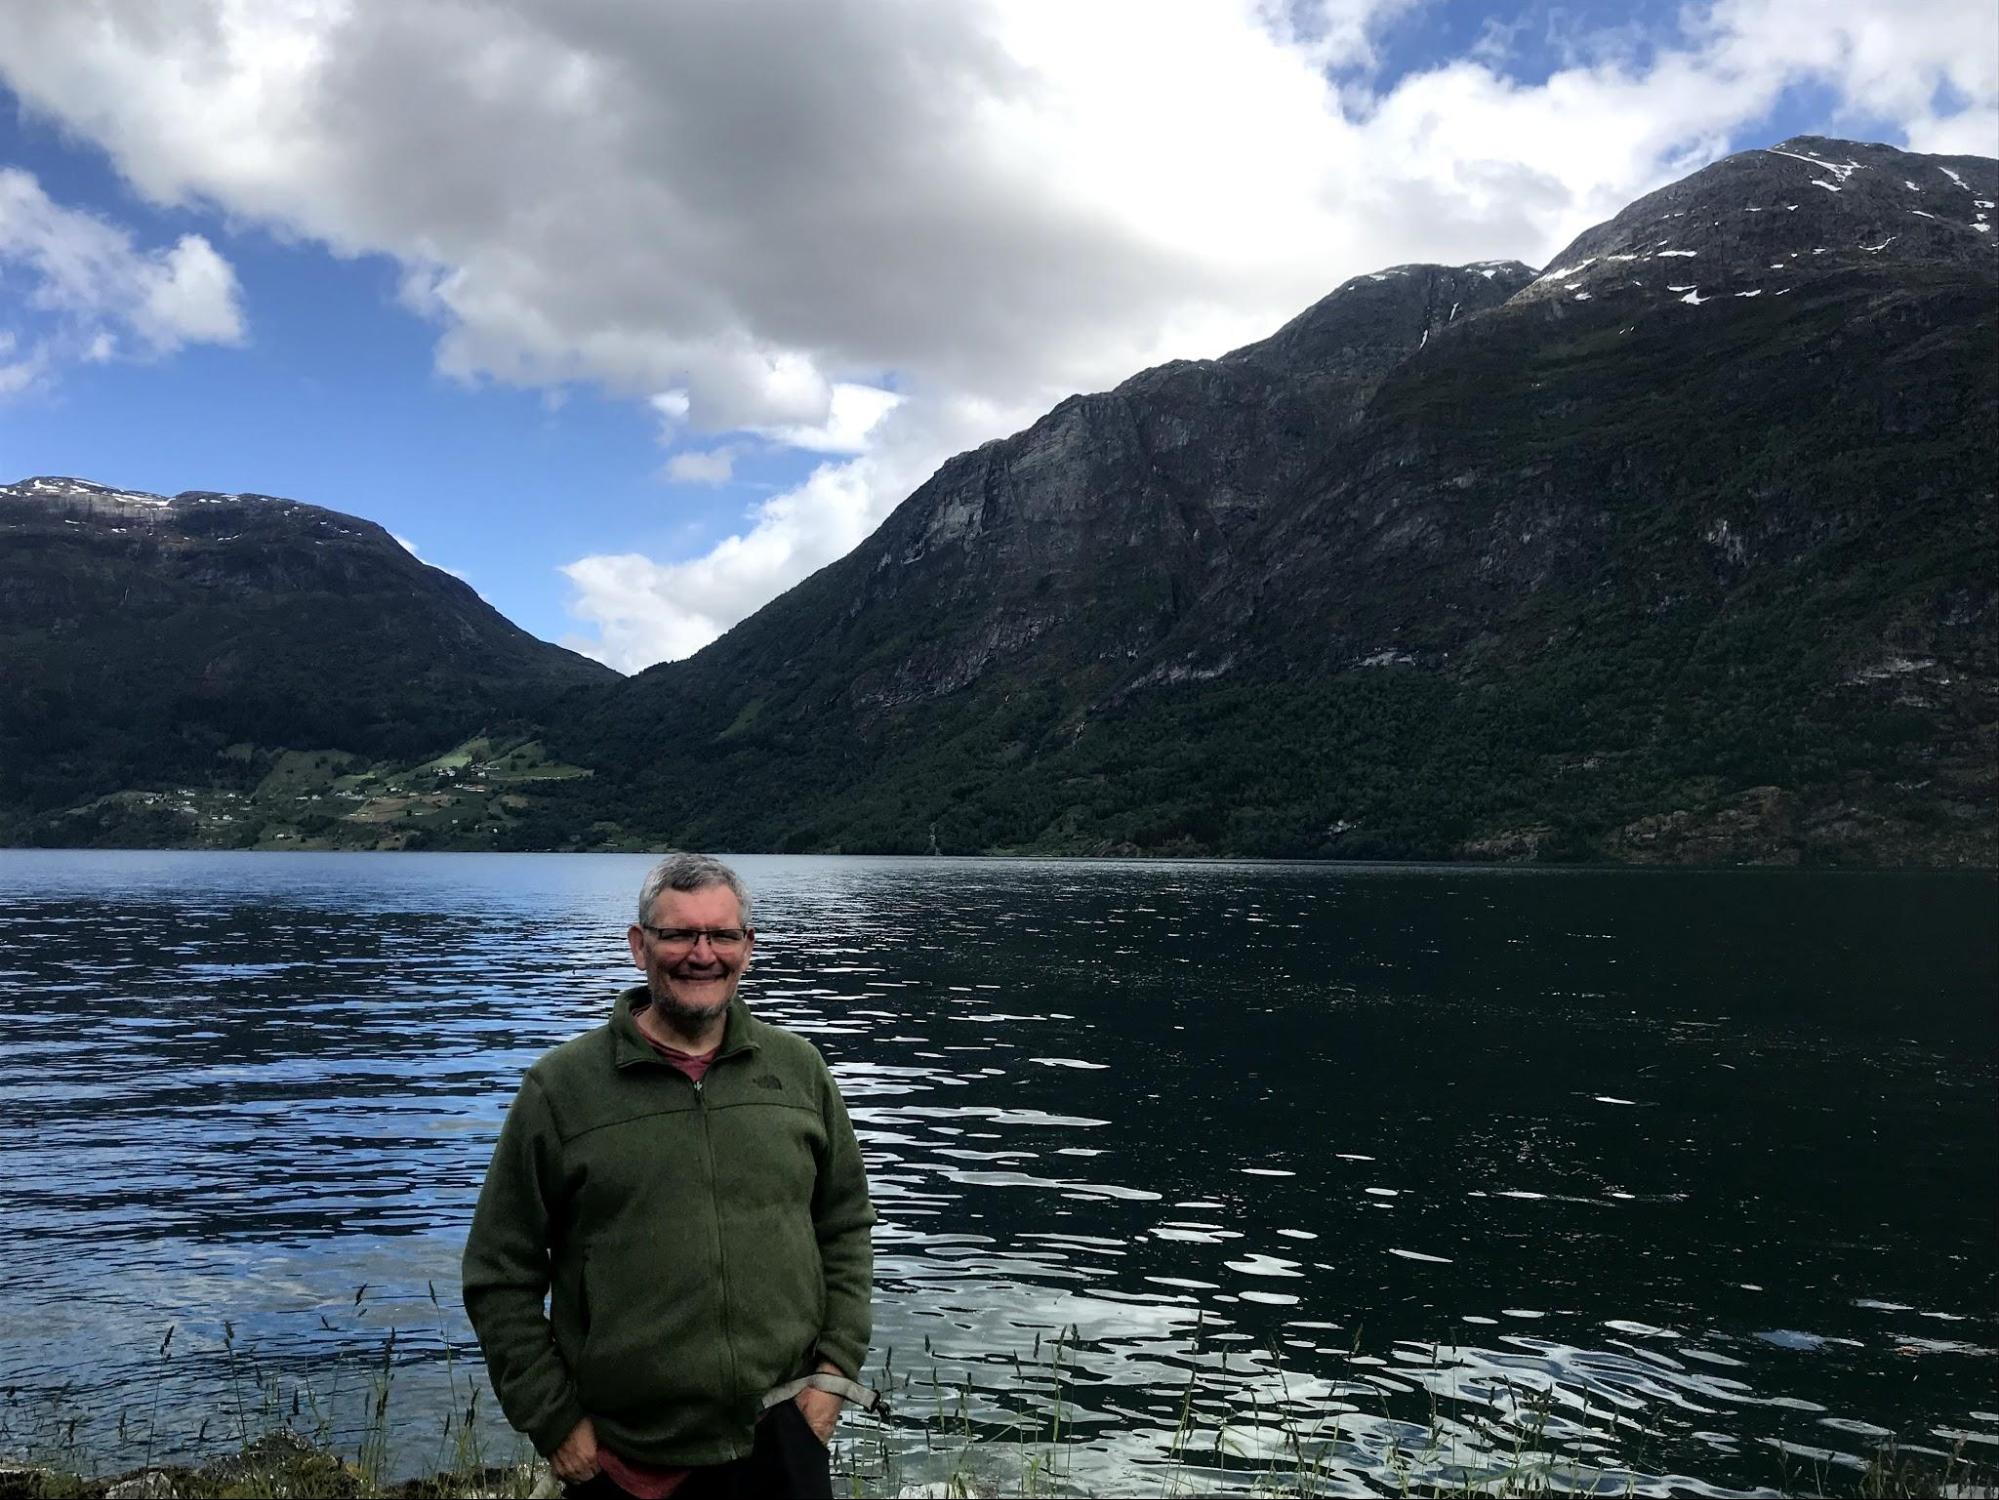 We were excited to land in Stryn for a wonderful lunch and visit